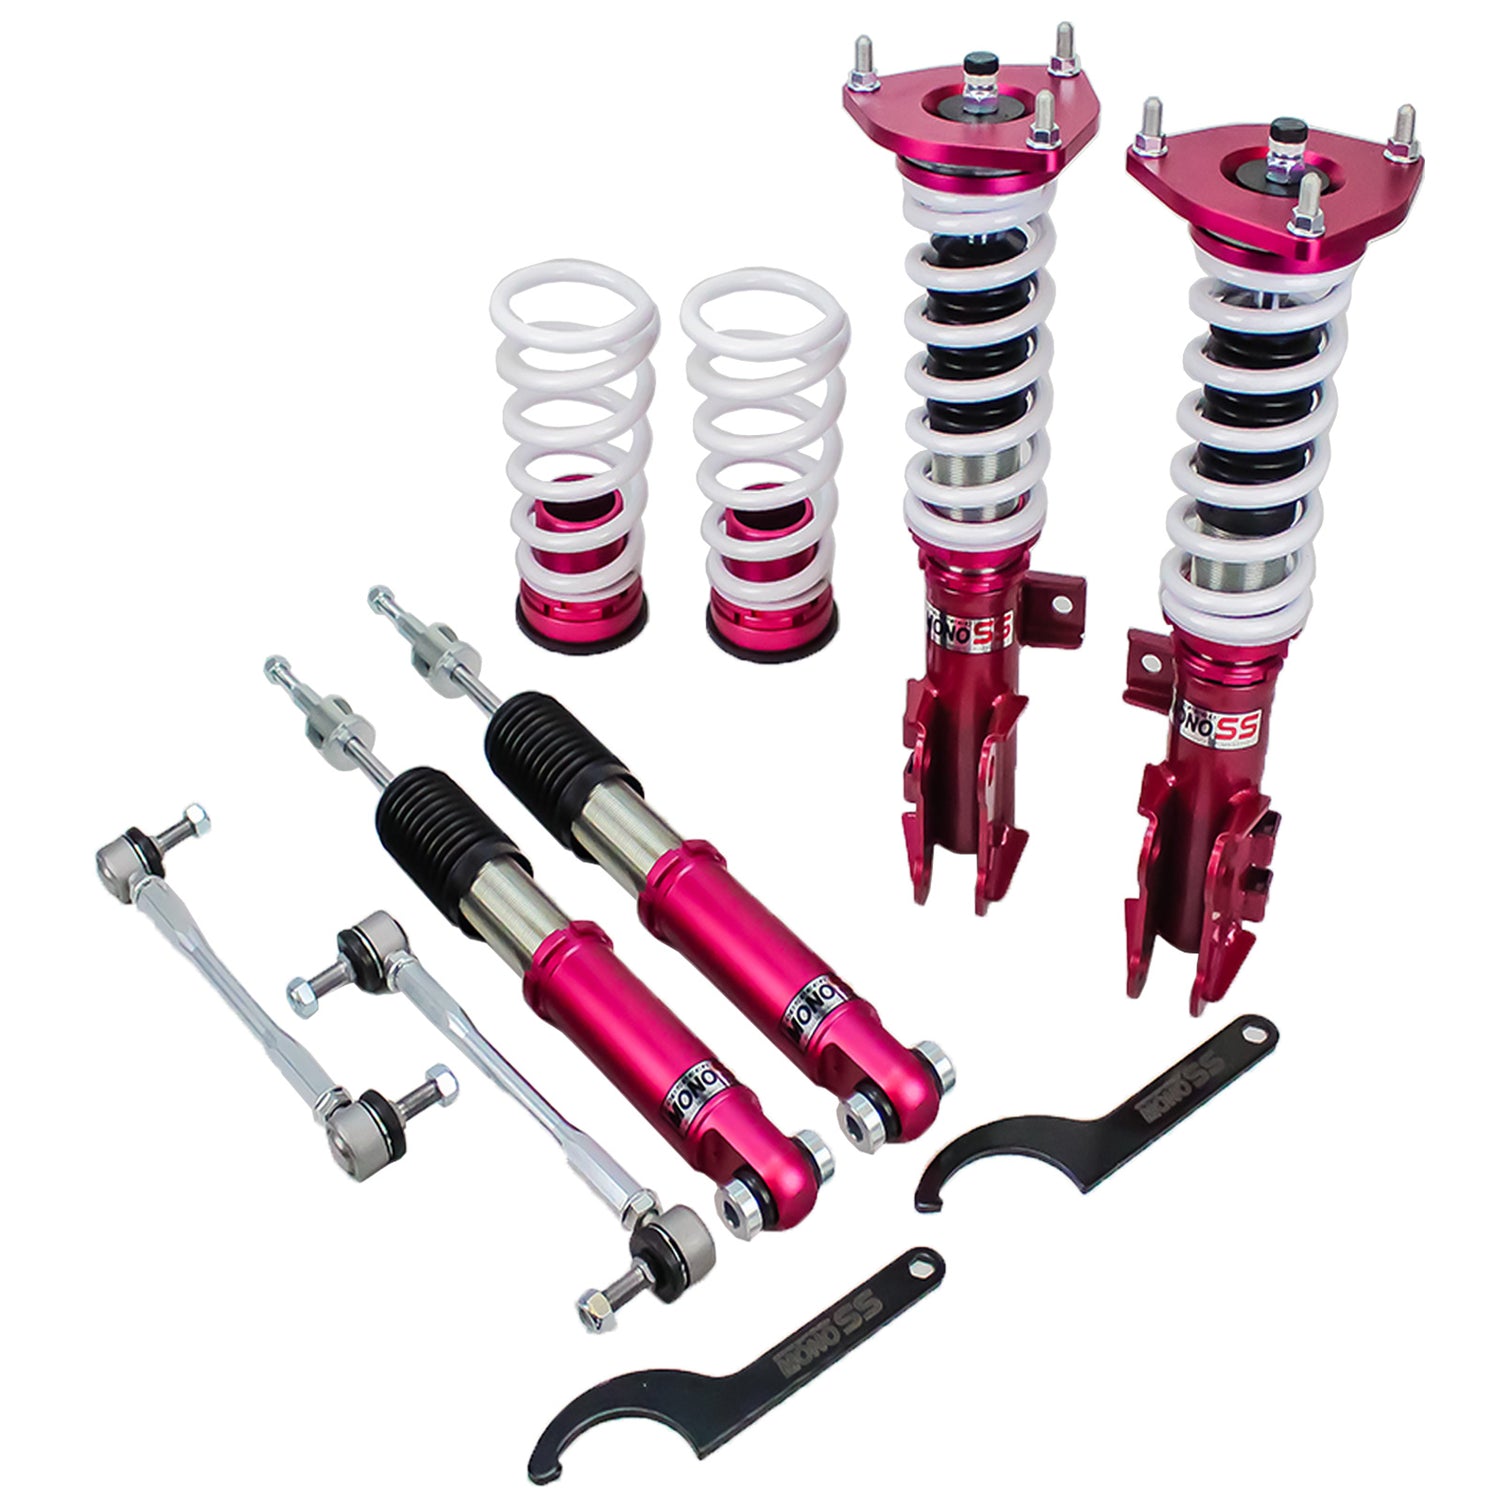 Godspeed MSS0113-A MonoSS Coilover Lowering Kit, Fully Adjustable, Ride Height, Spring Tension And 16 Click Damping, Hyundai Sonata(LF) 2015+